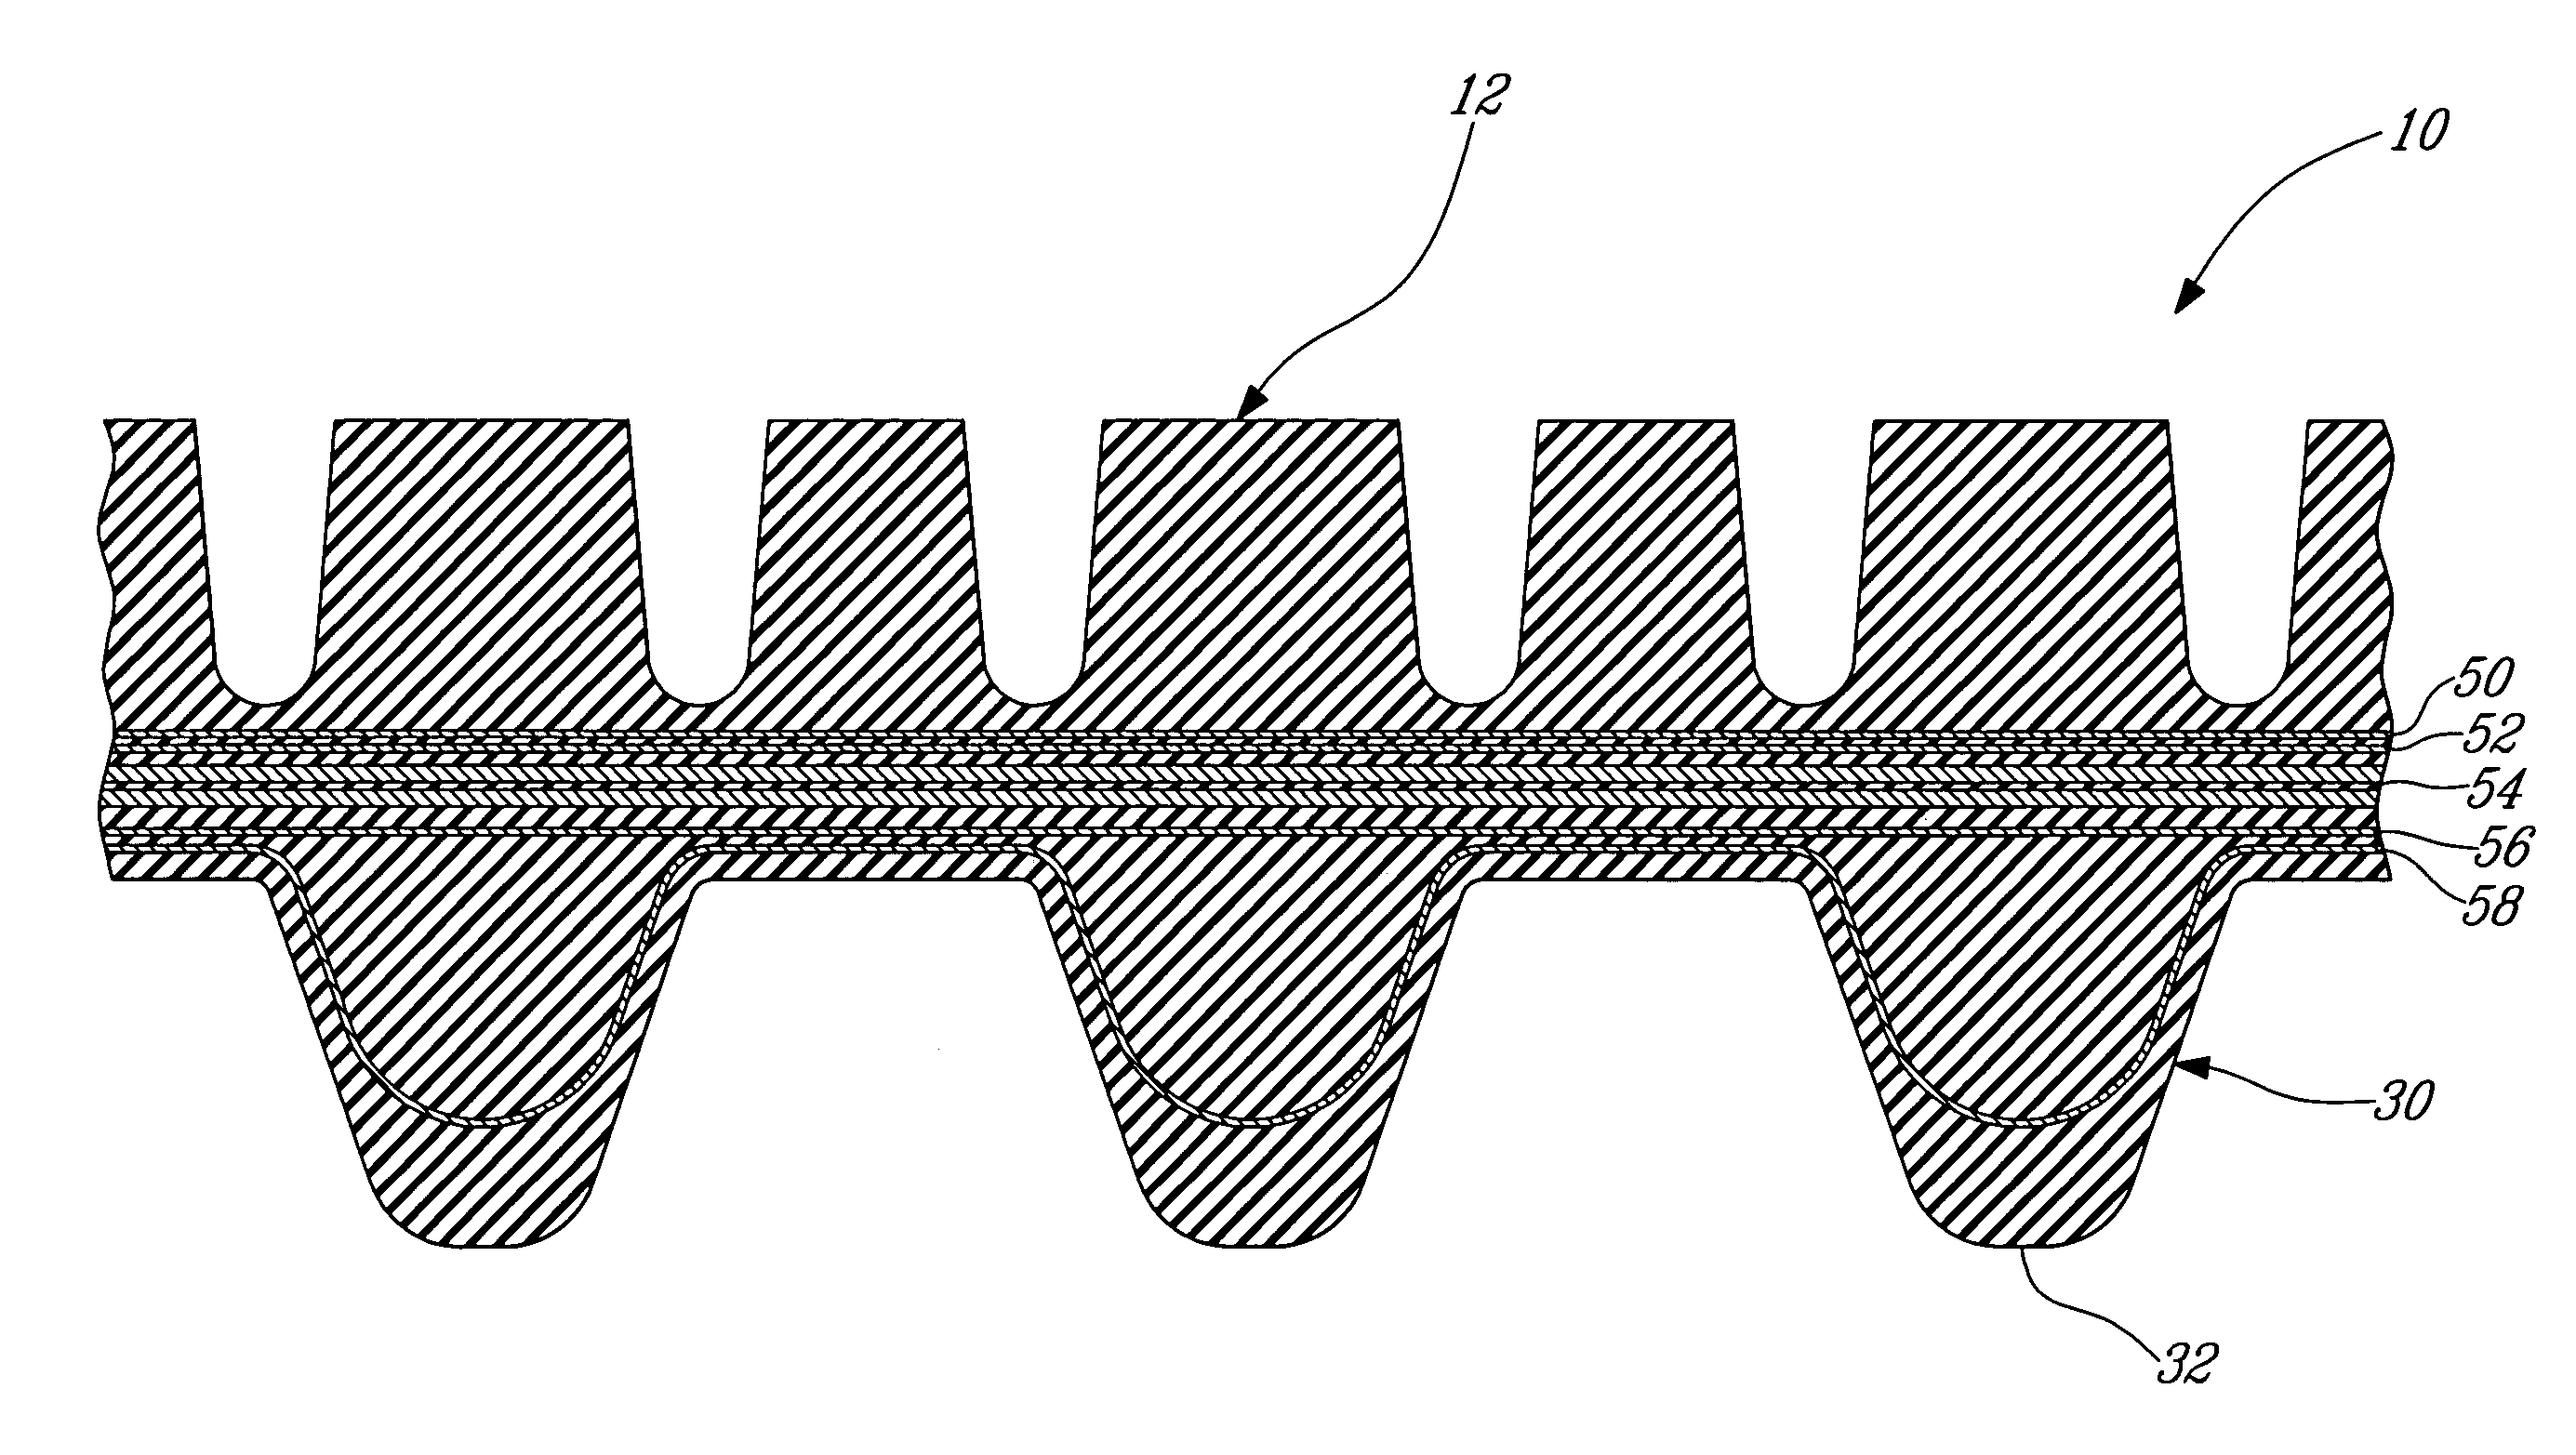 Endless track for industrial or agricultural vehicles